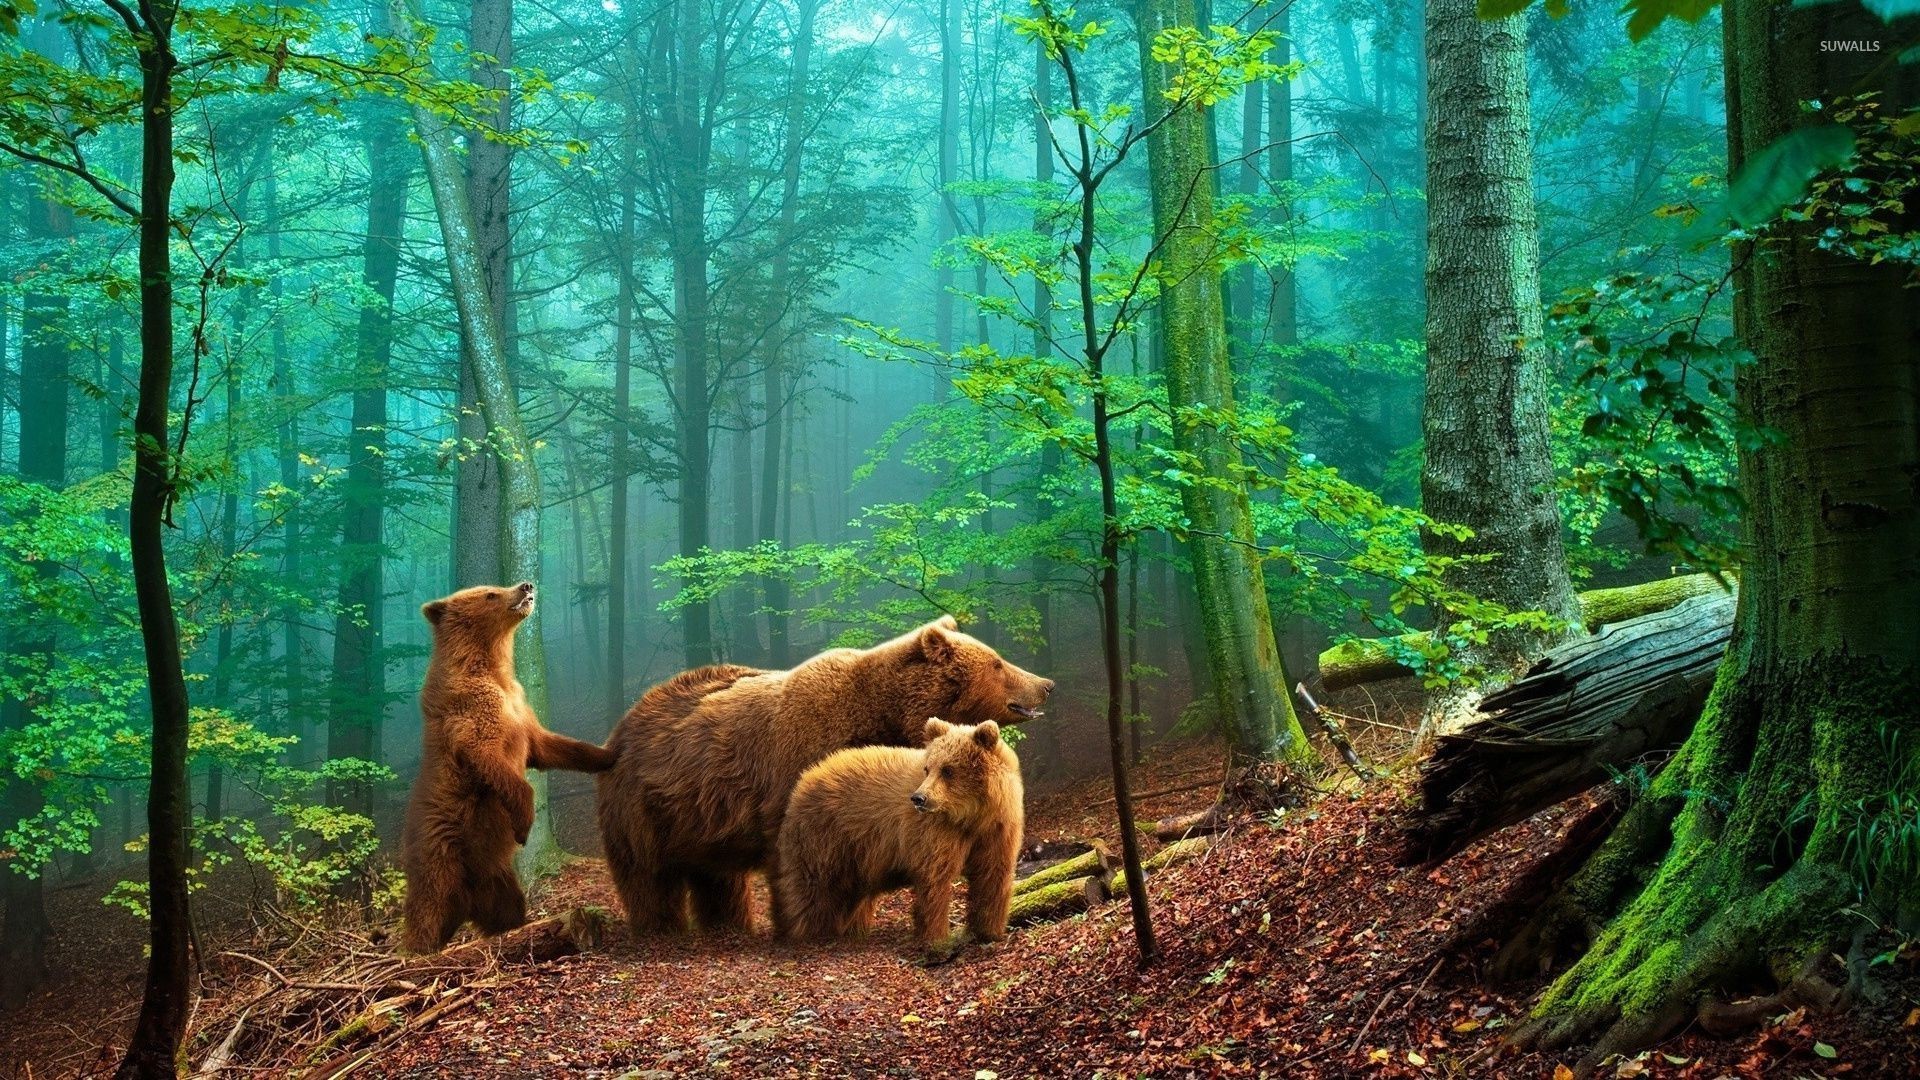 Bears in the foggy forest wallpaper